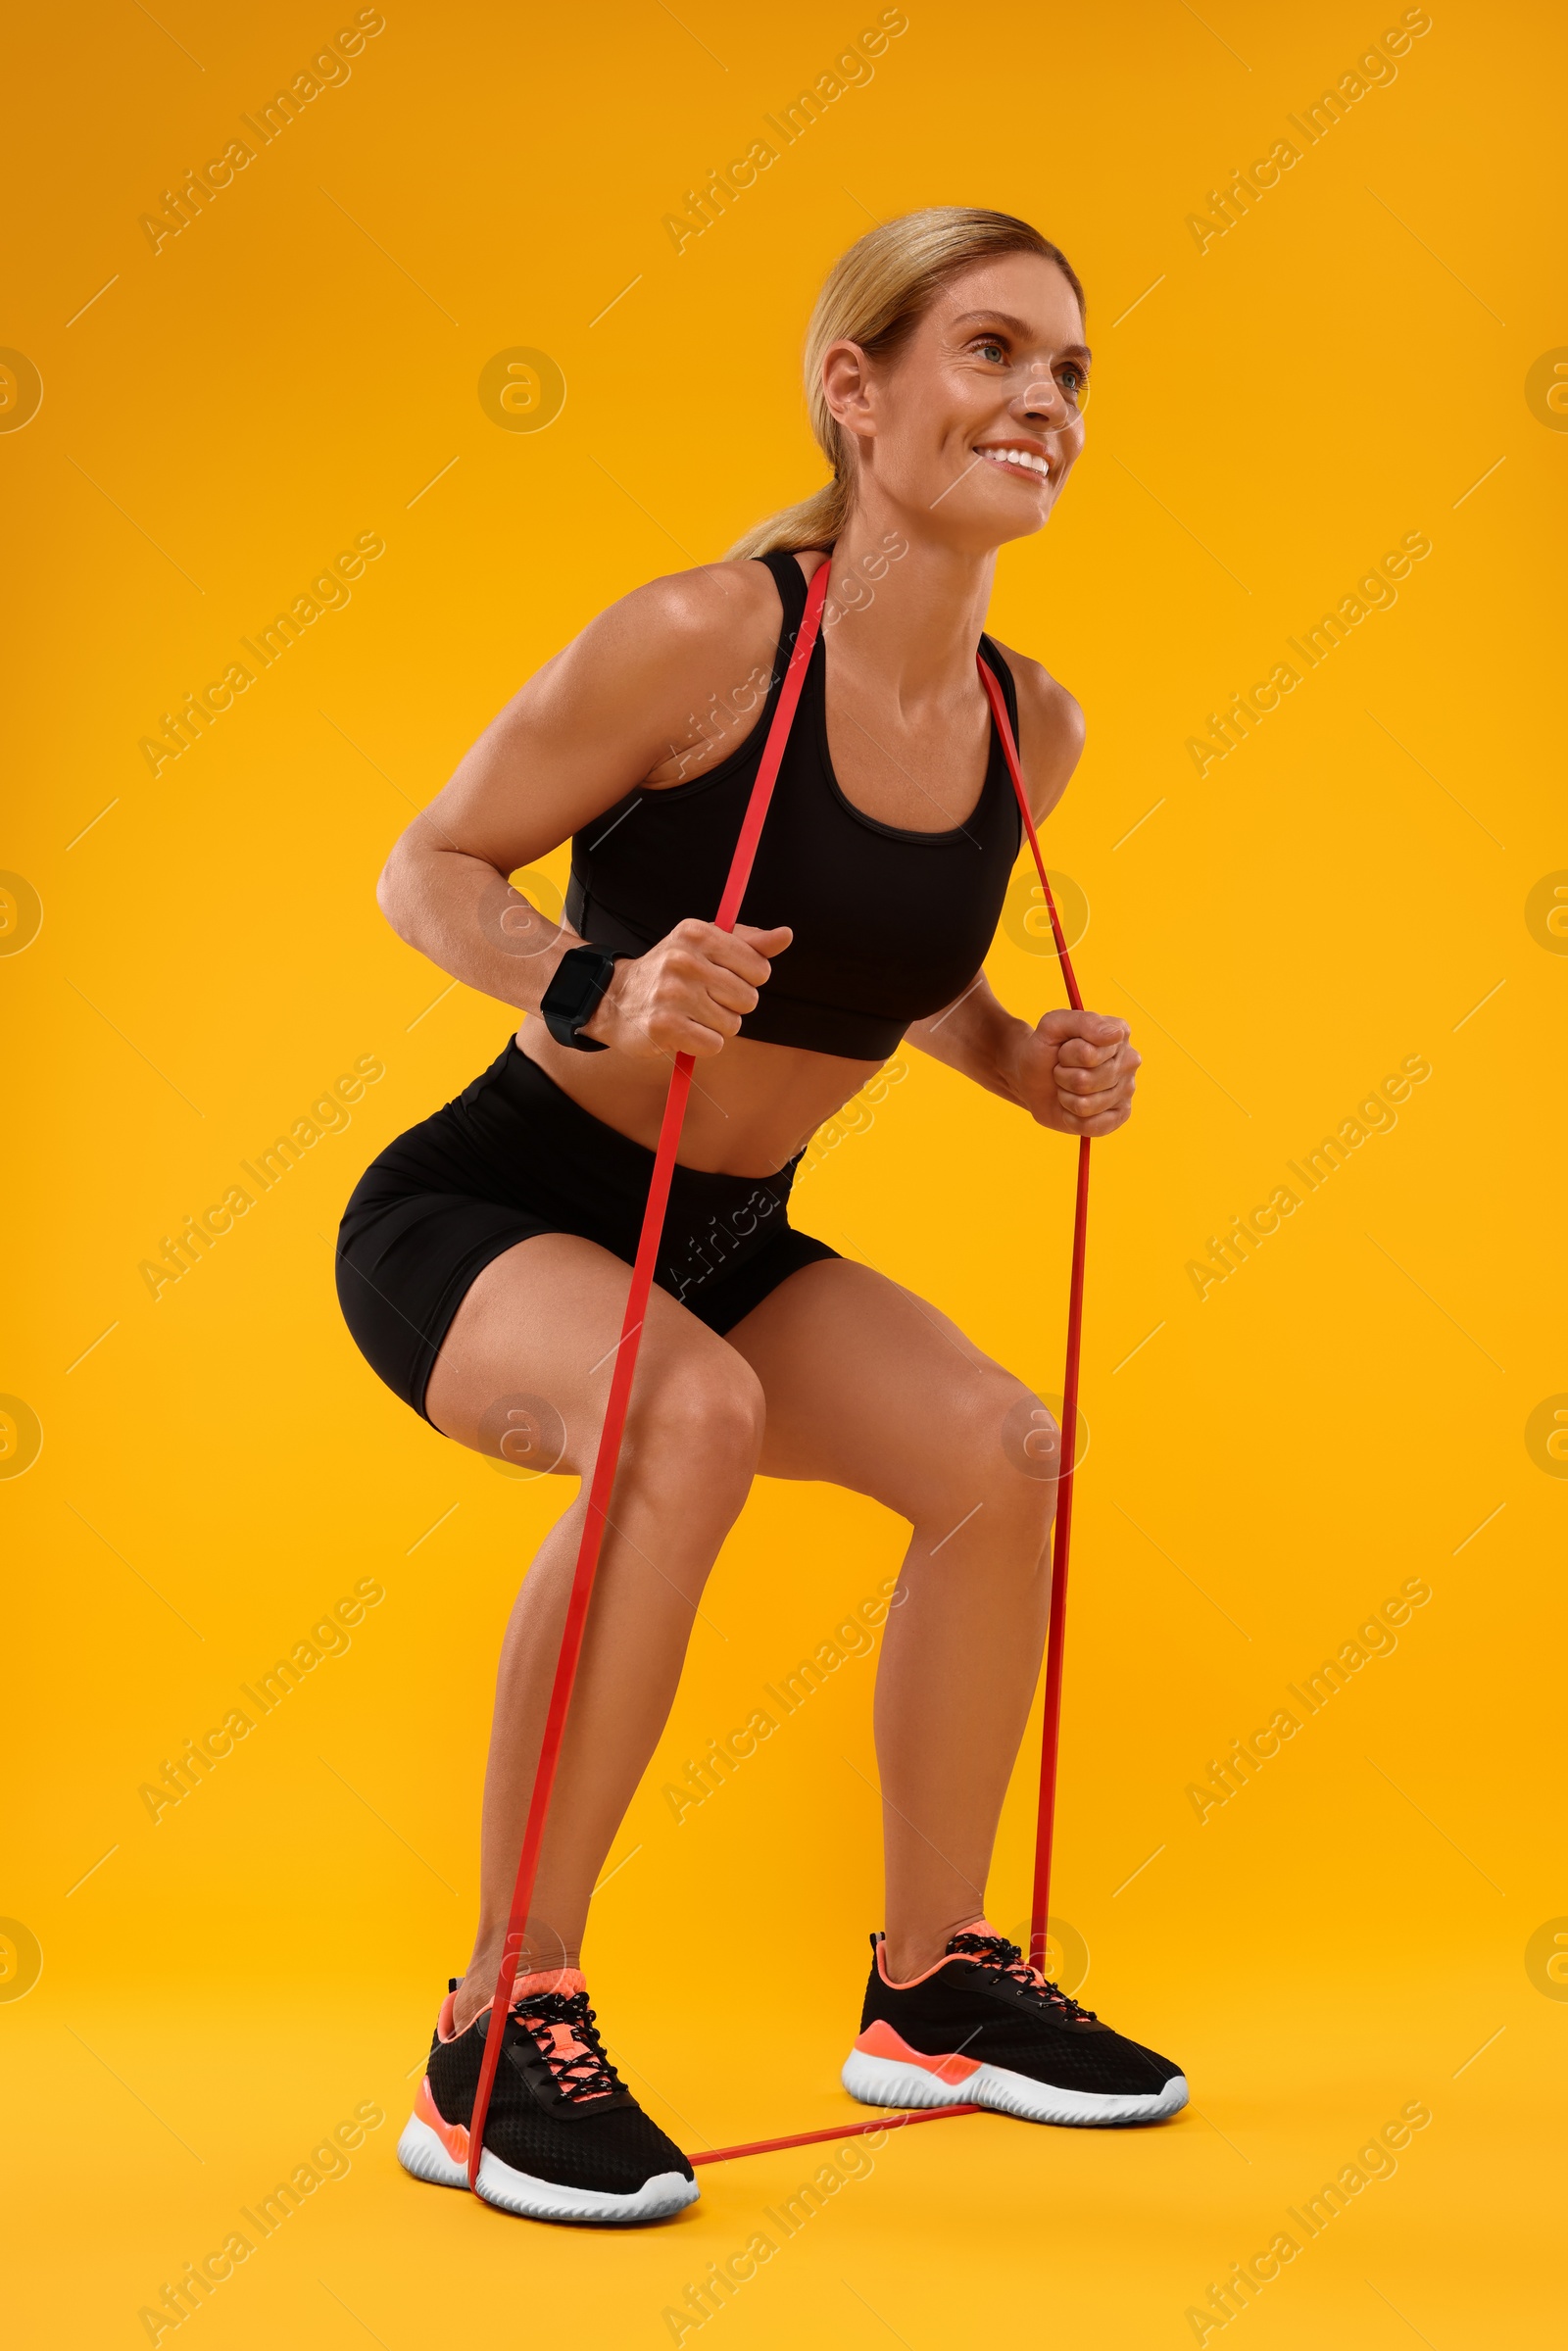 Photo of Woman exercising with elastic resistance band on orange background, low angle view